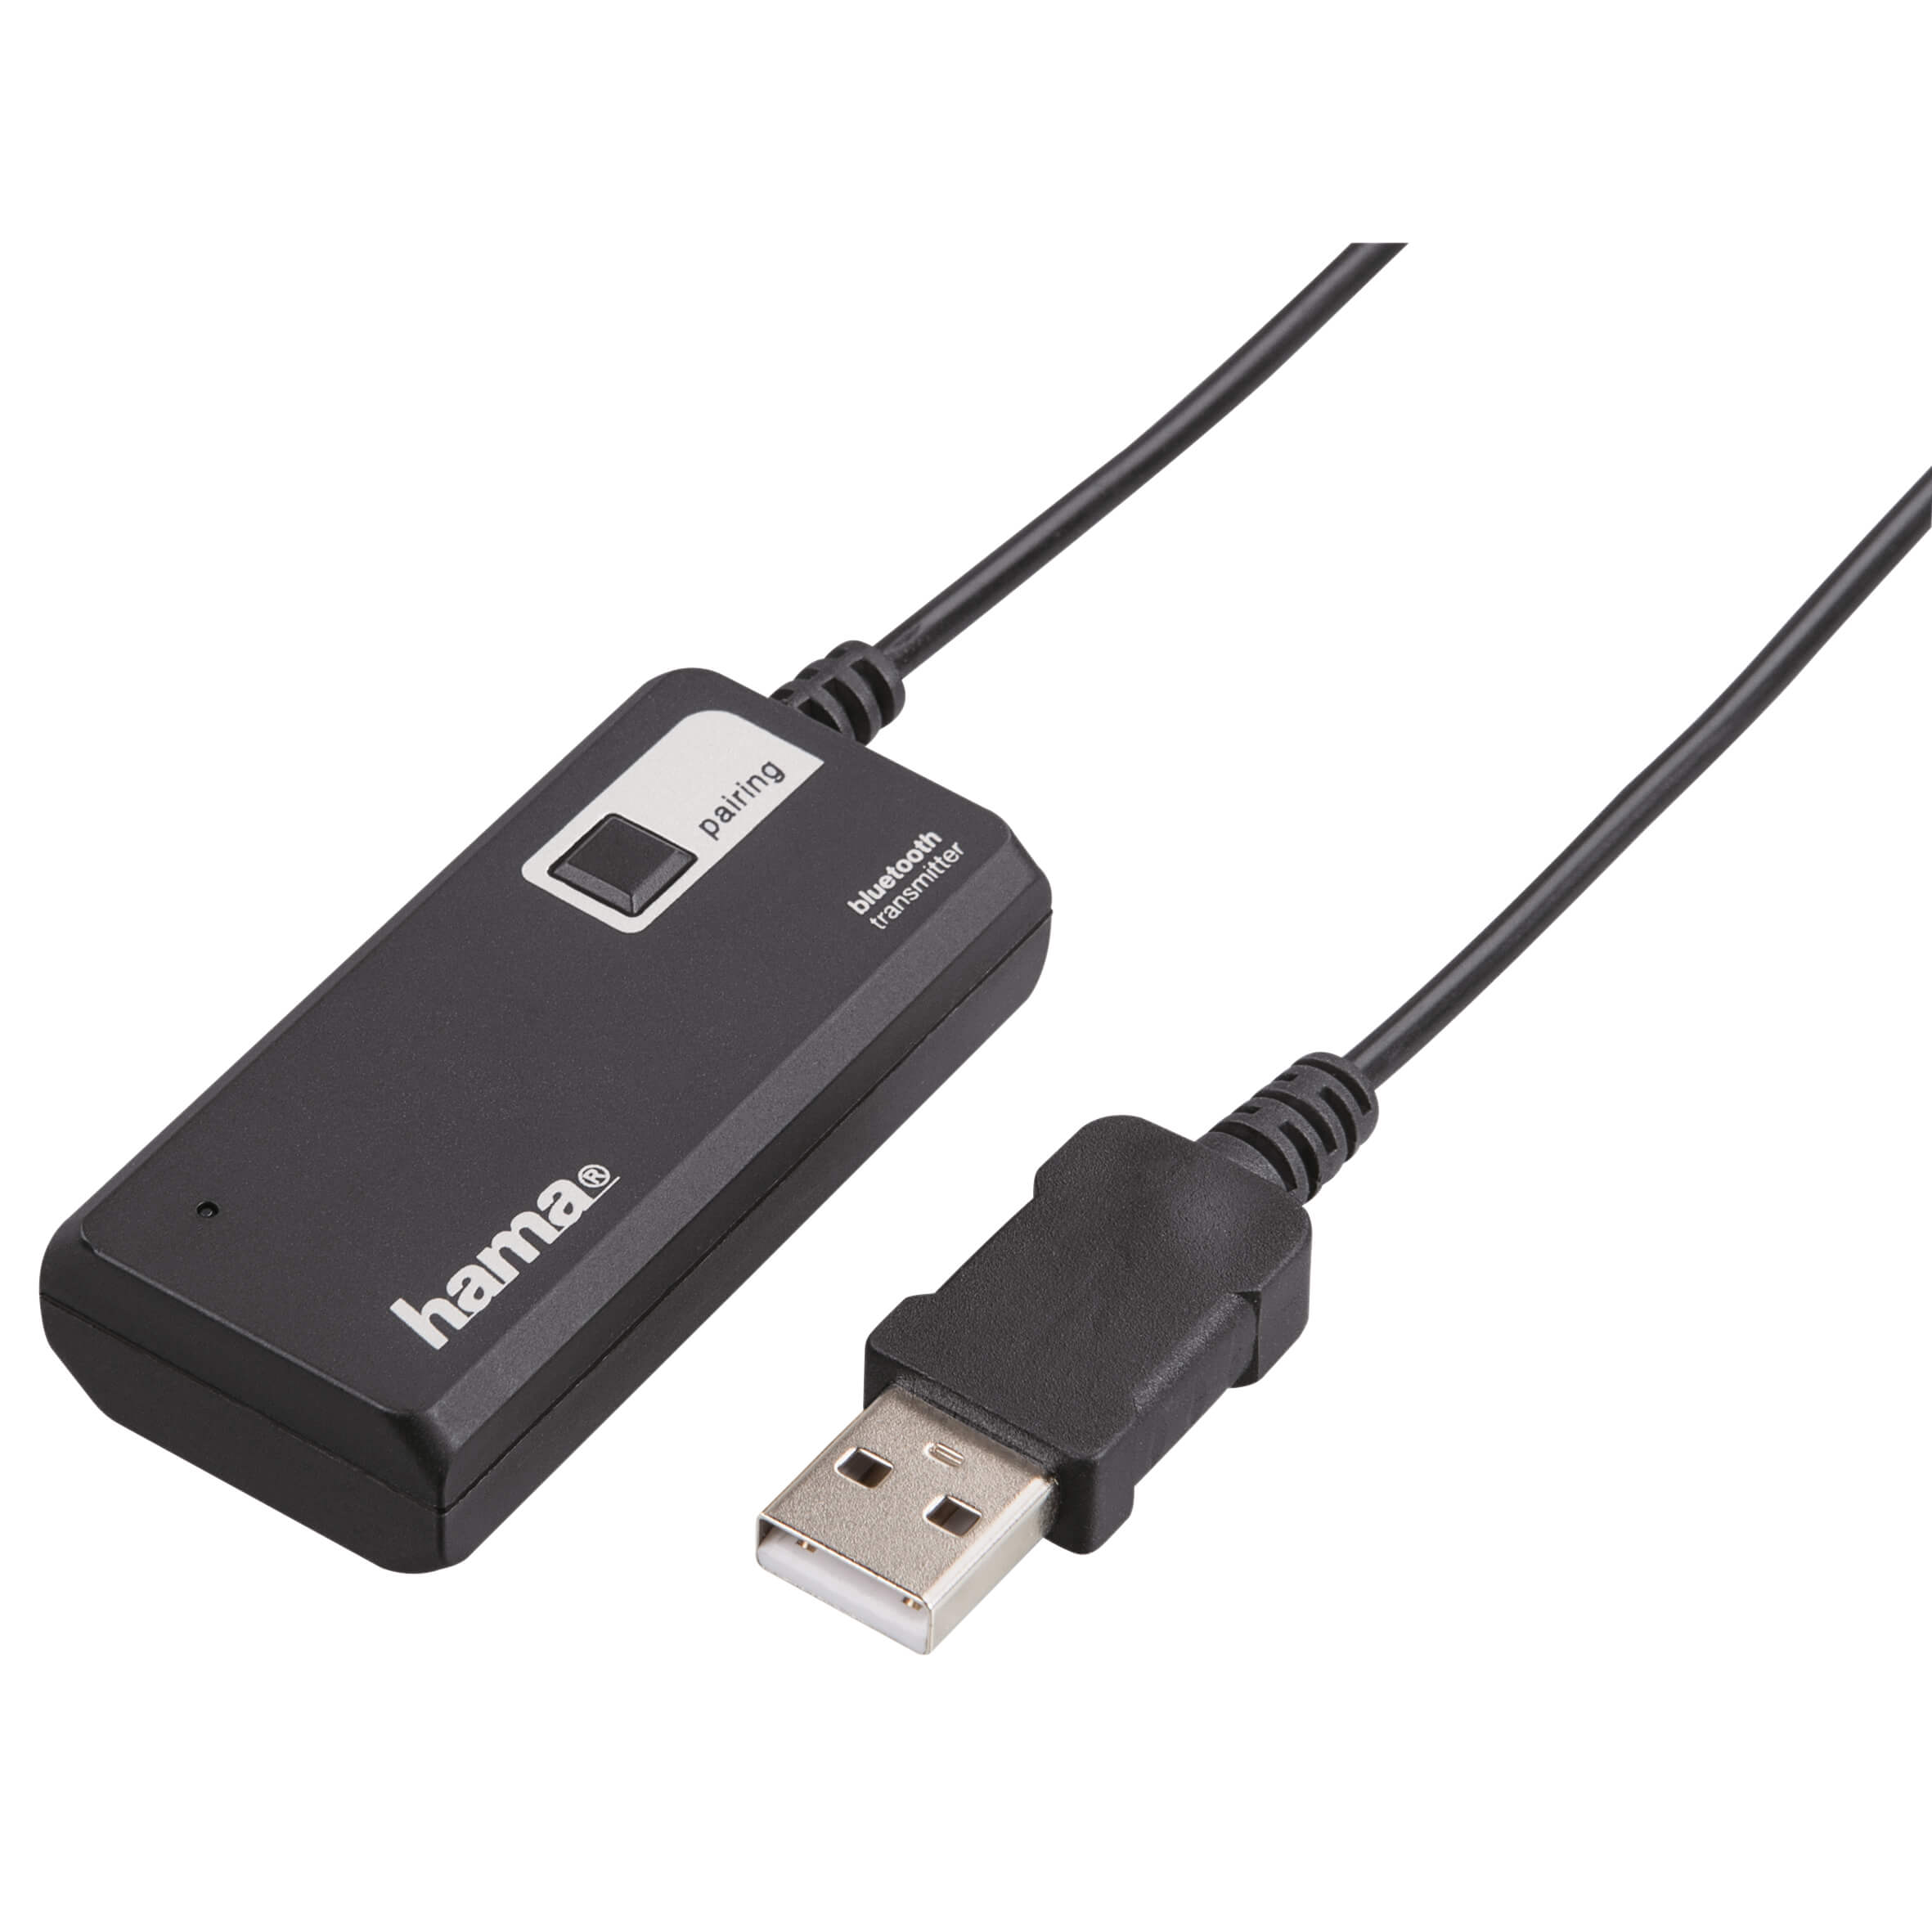 HAMA Twin Bluetooth Audio Transmitter for two headphones